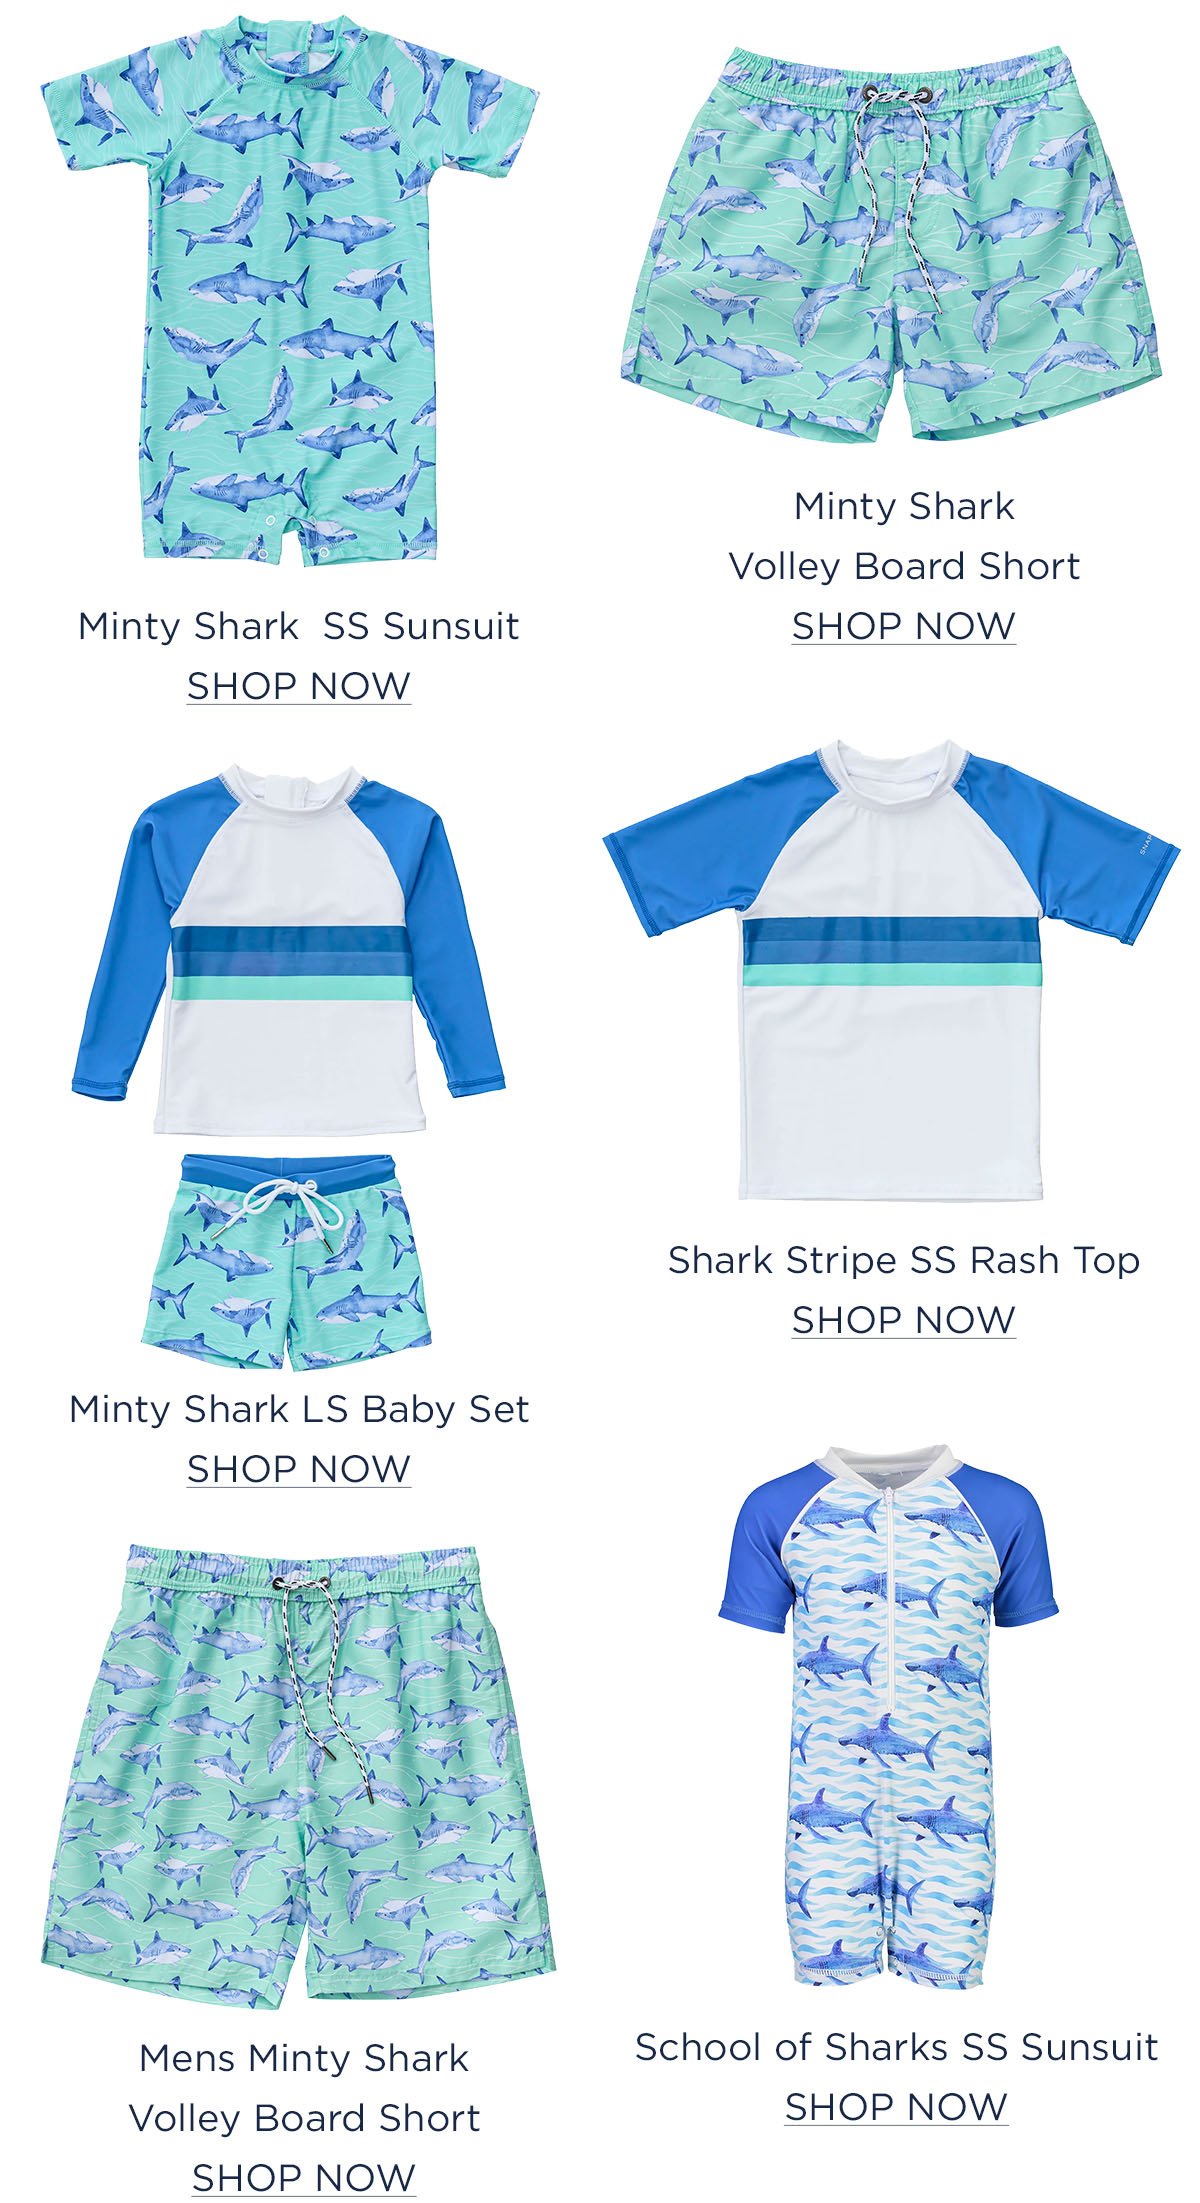 Minty Shark collection for boys.